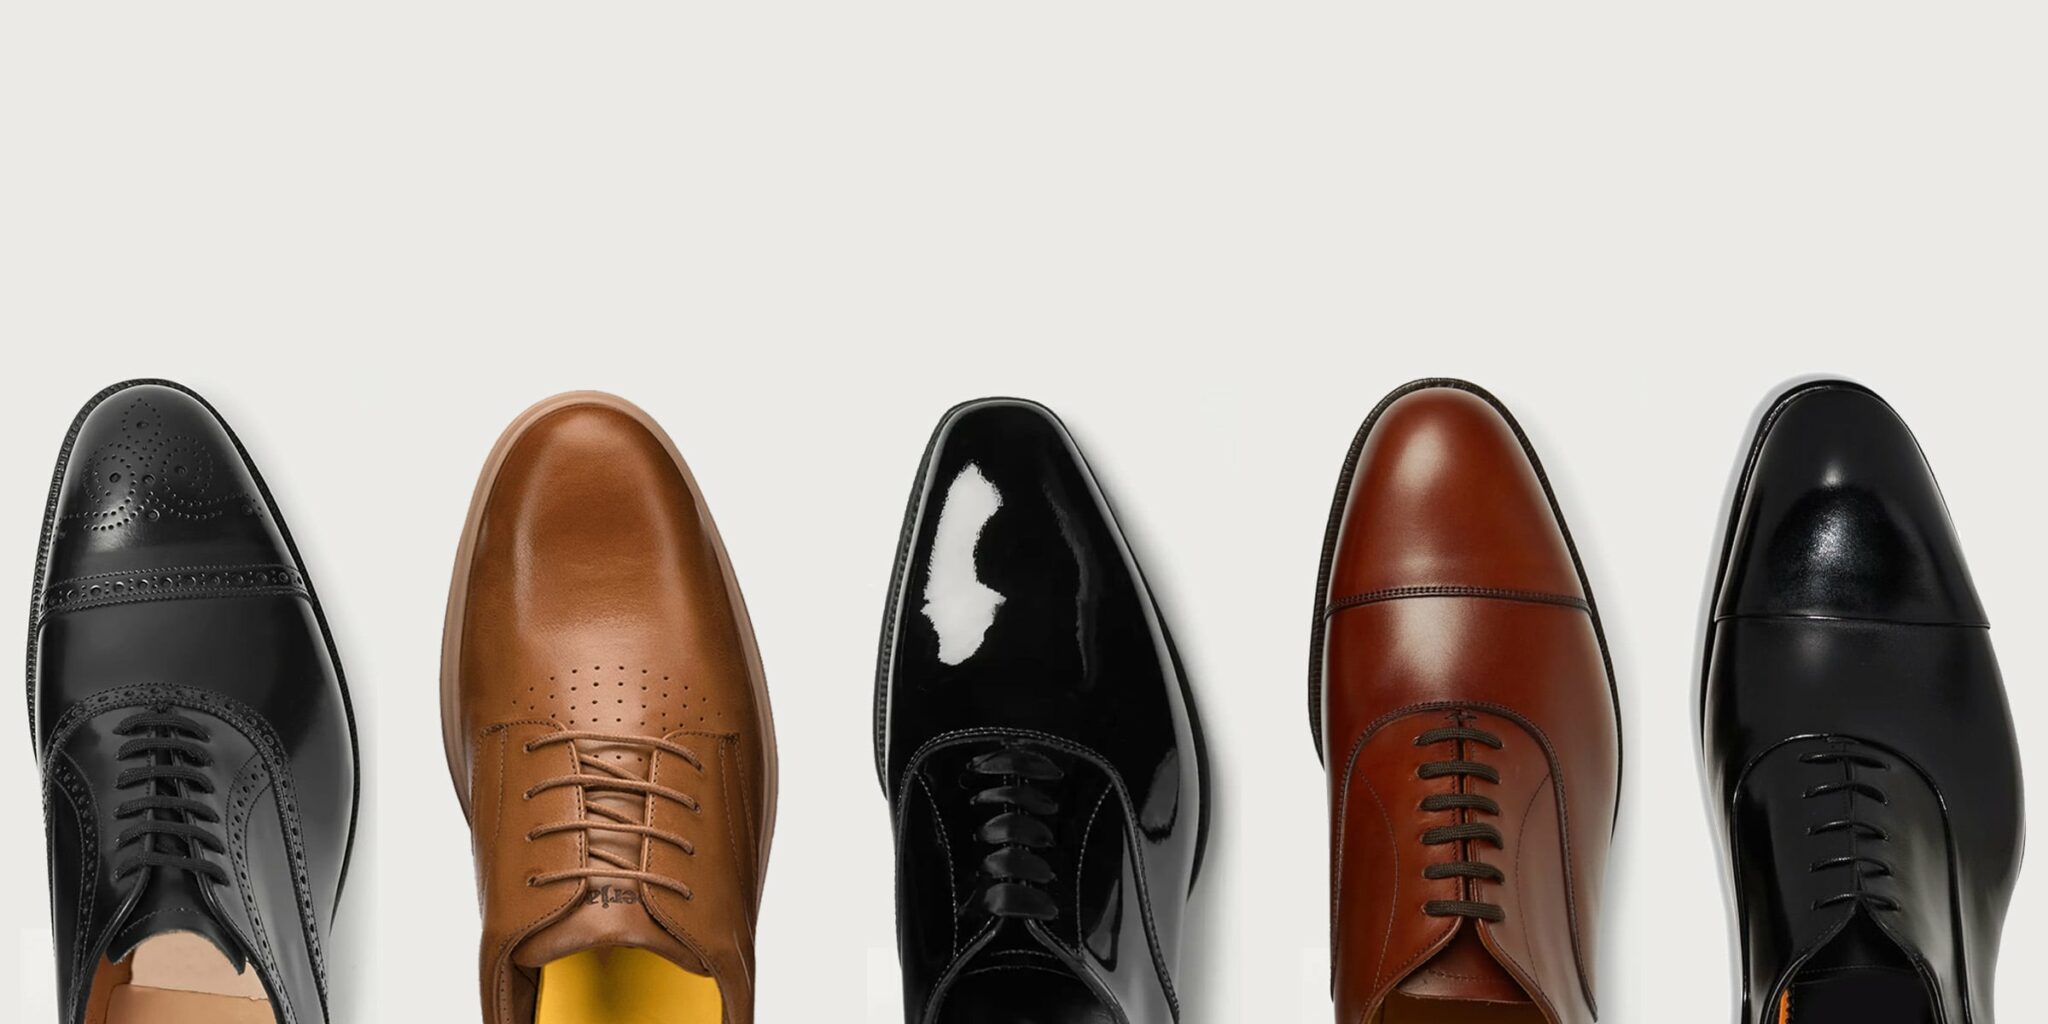 21 Best Dress Shoes for Men Dress Shoe Style Guide to Impress (2022)